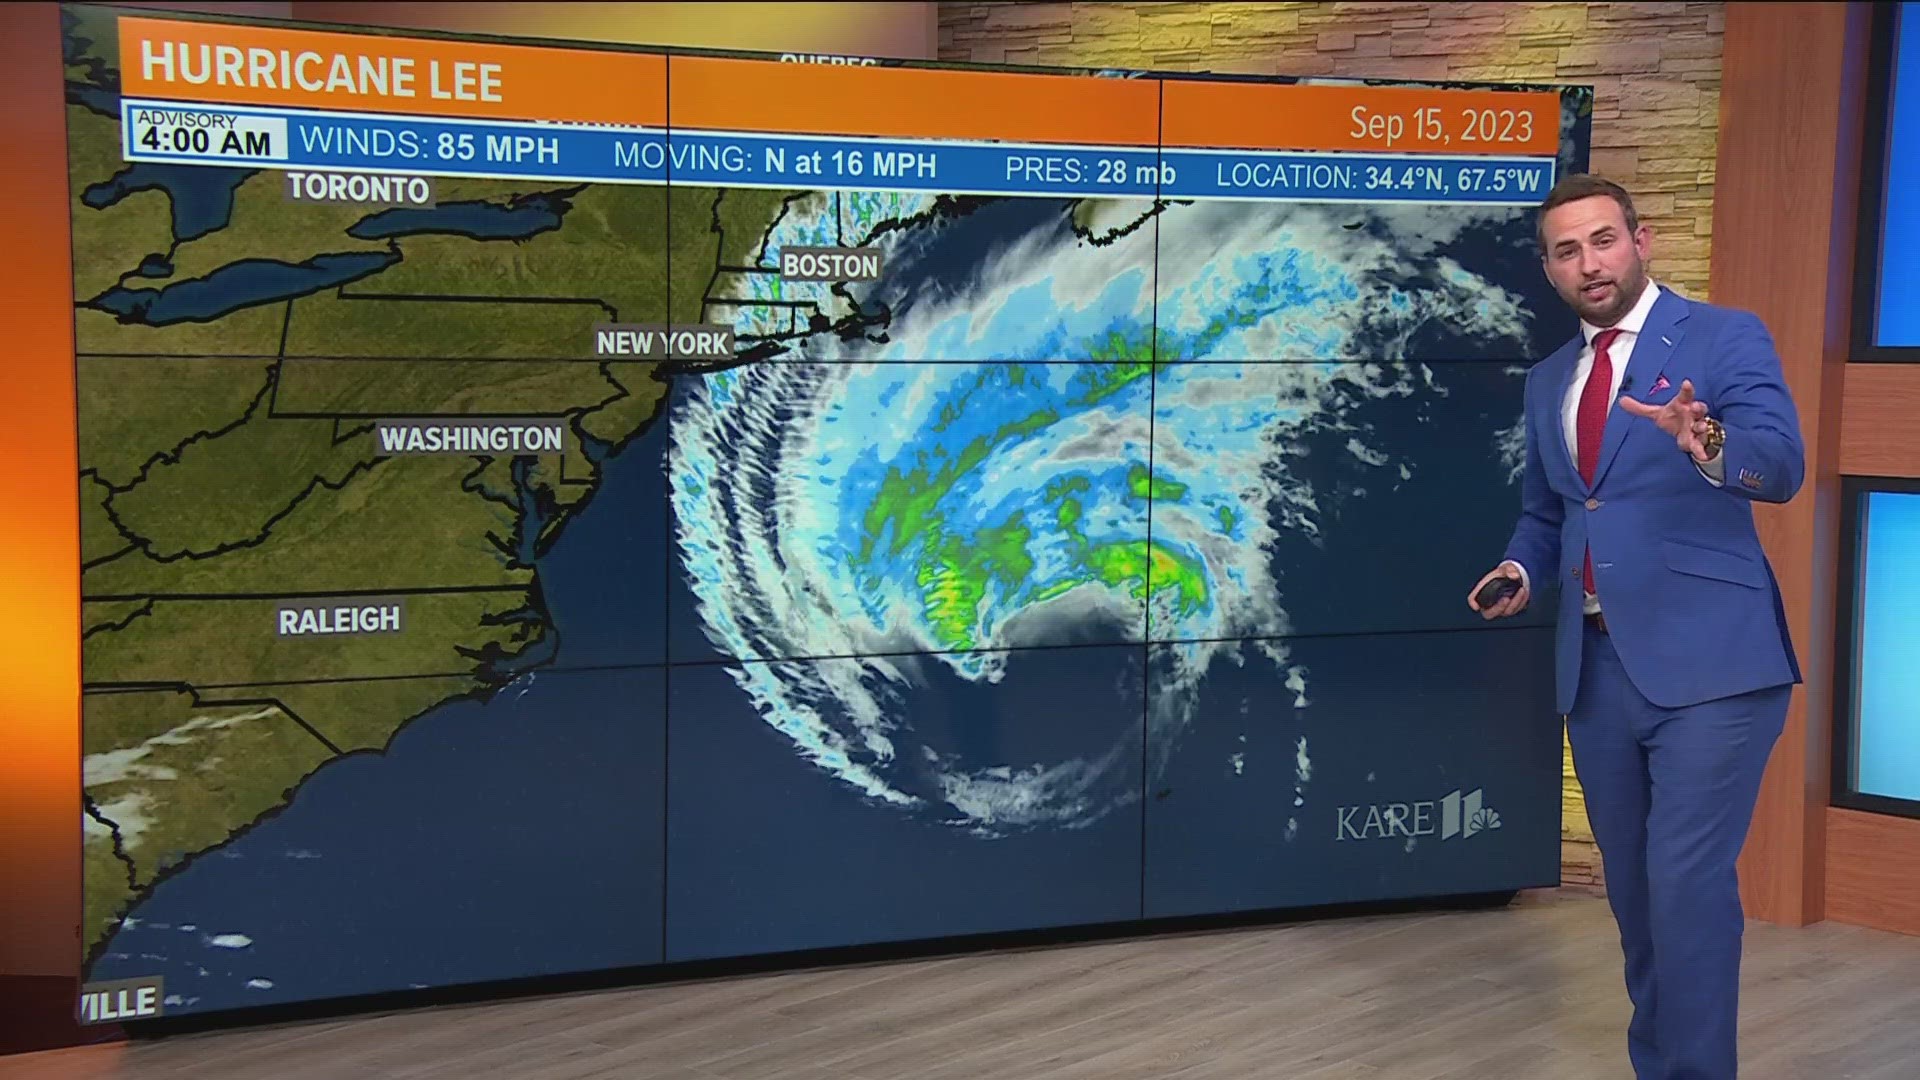 Hurricane Lee is expected to impact parts of Maine.